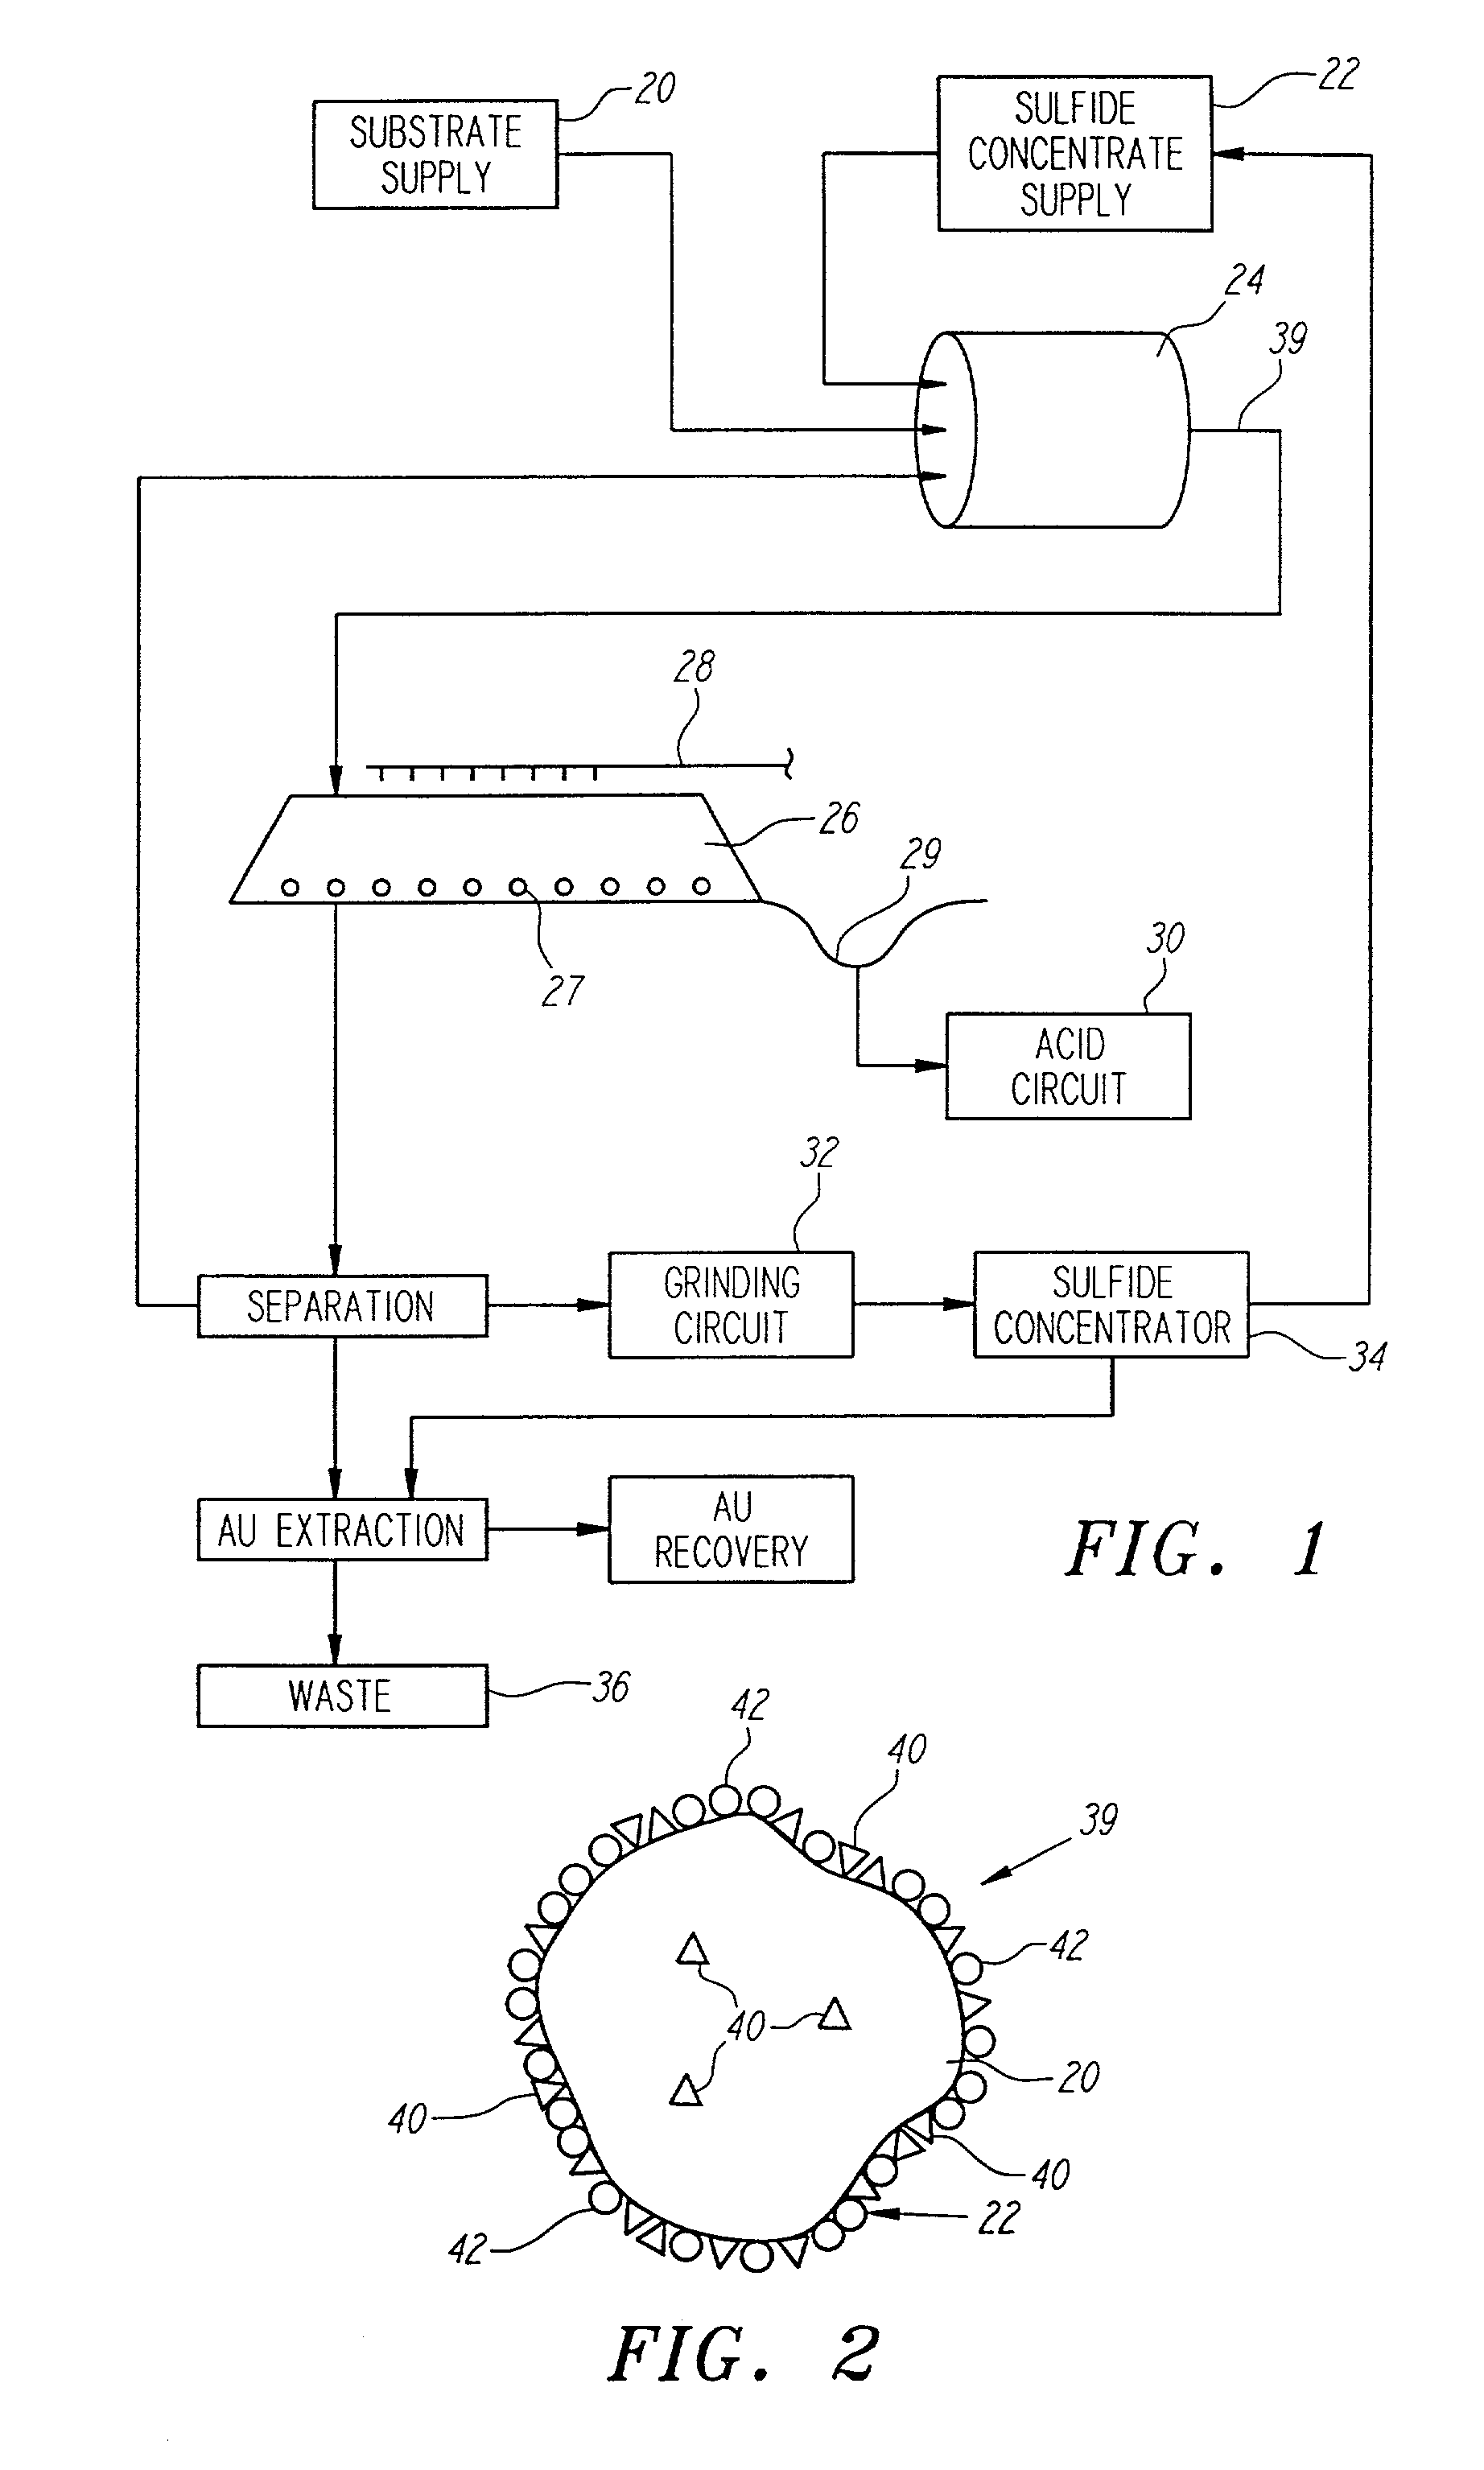 Method of biotreatment for solid materials in a nonstirred surface bioreactor